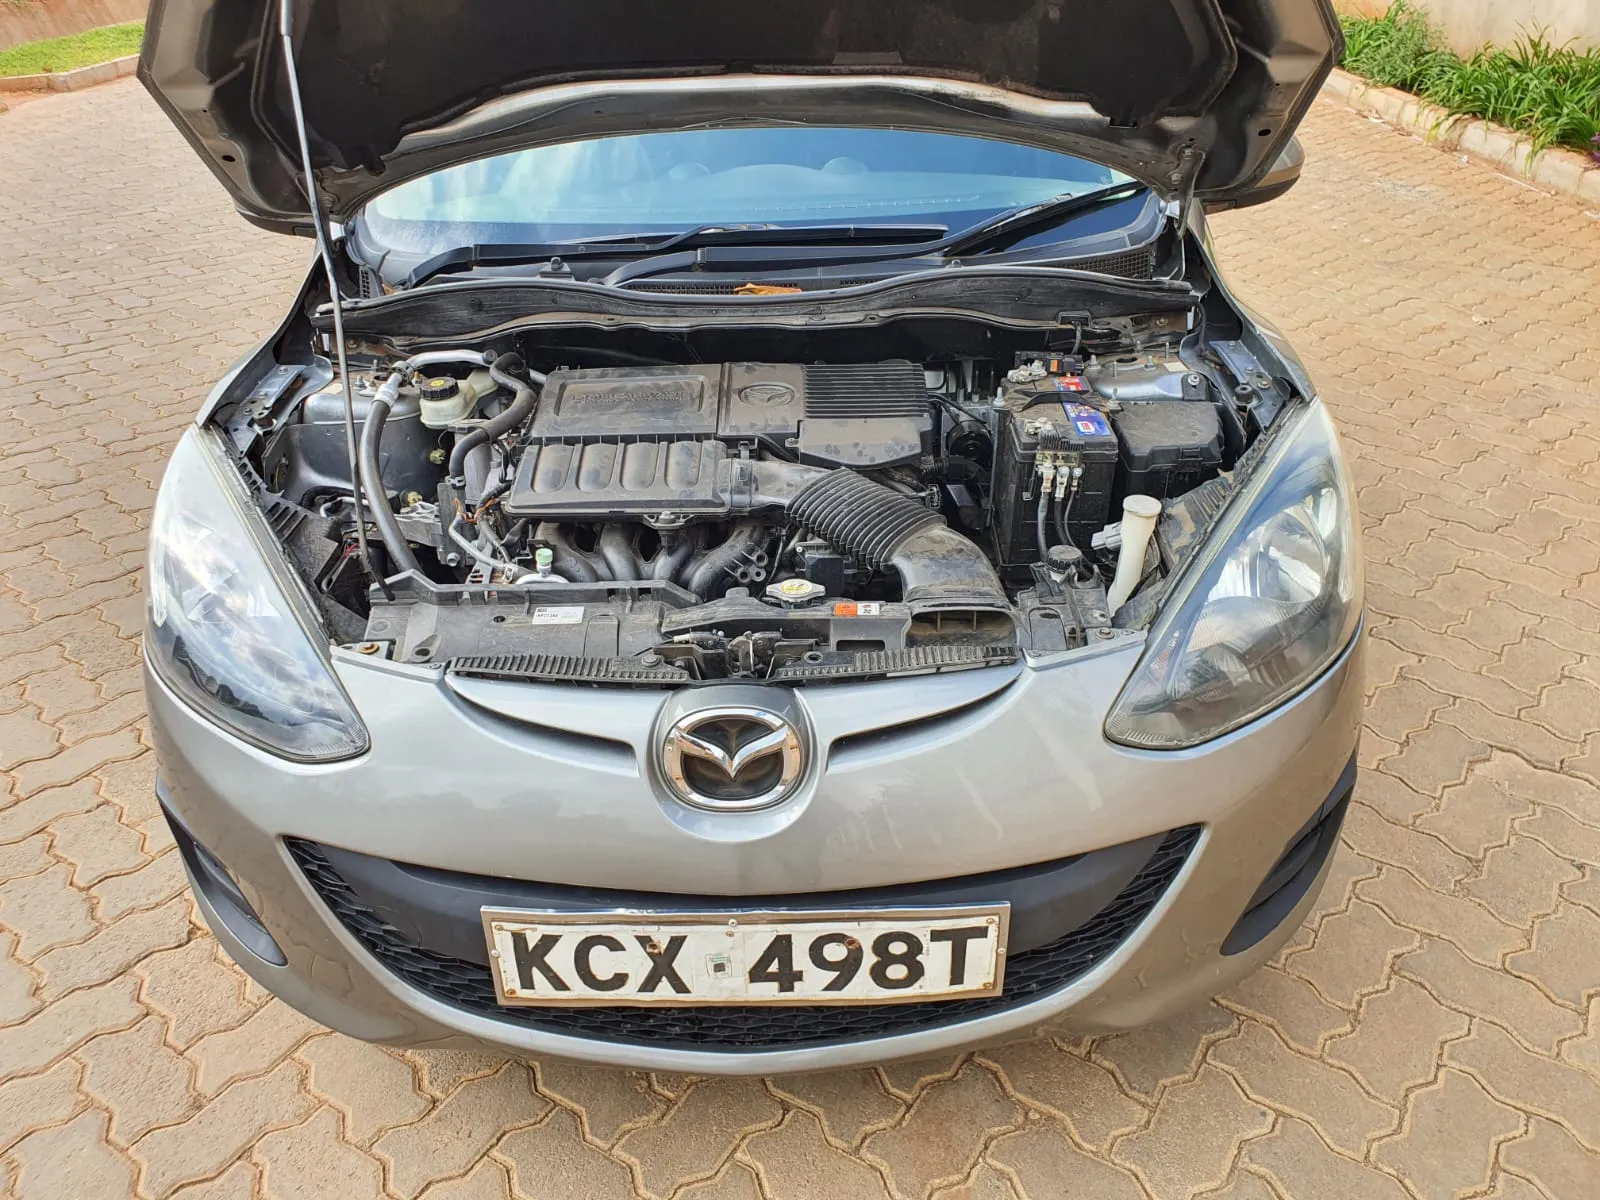 Mazda Demio kenya QUICK SALE You Pay 30% DEPOSIT demio for sale in kenya hire purchase installments TRADE IN OK EXCLUSIVE